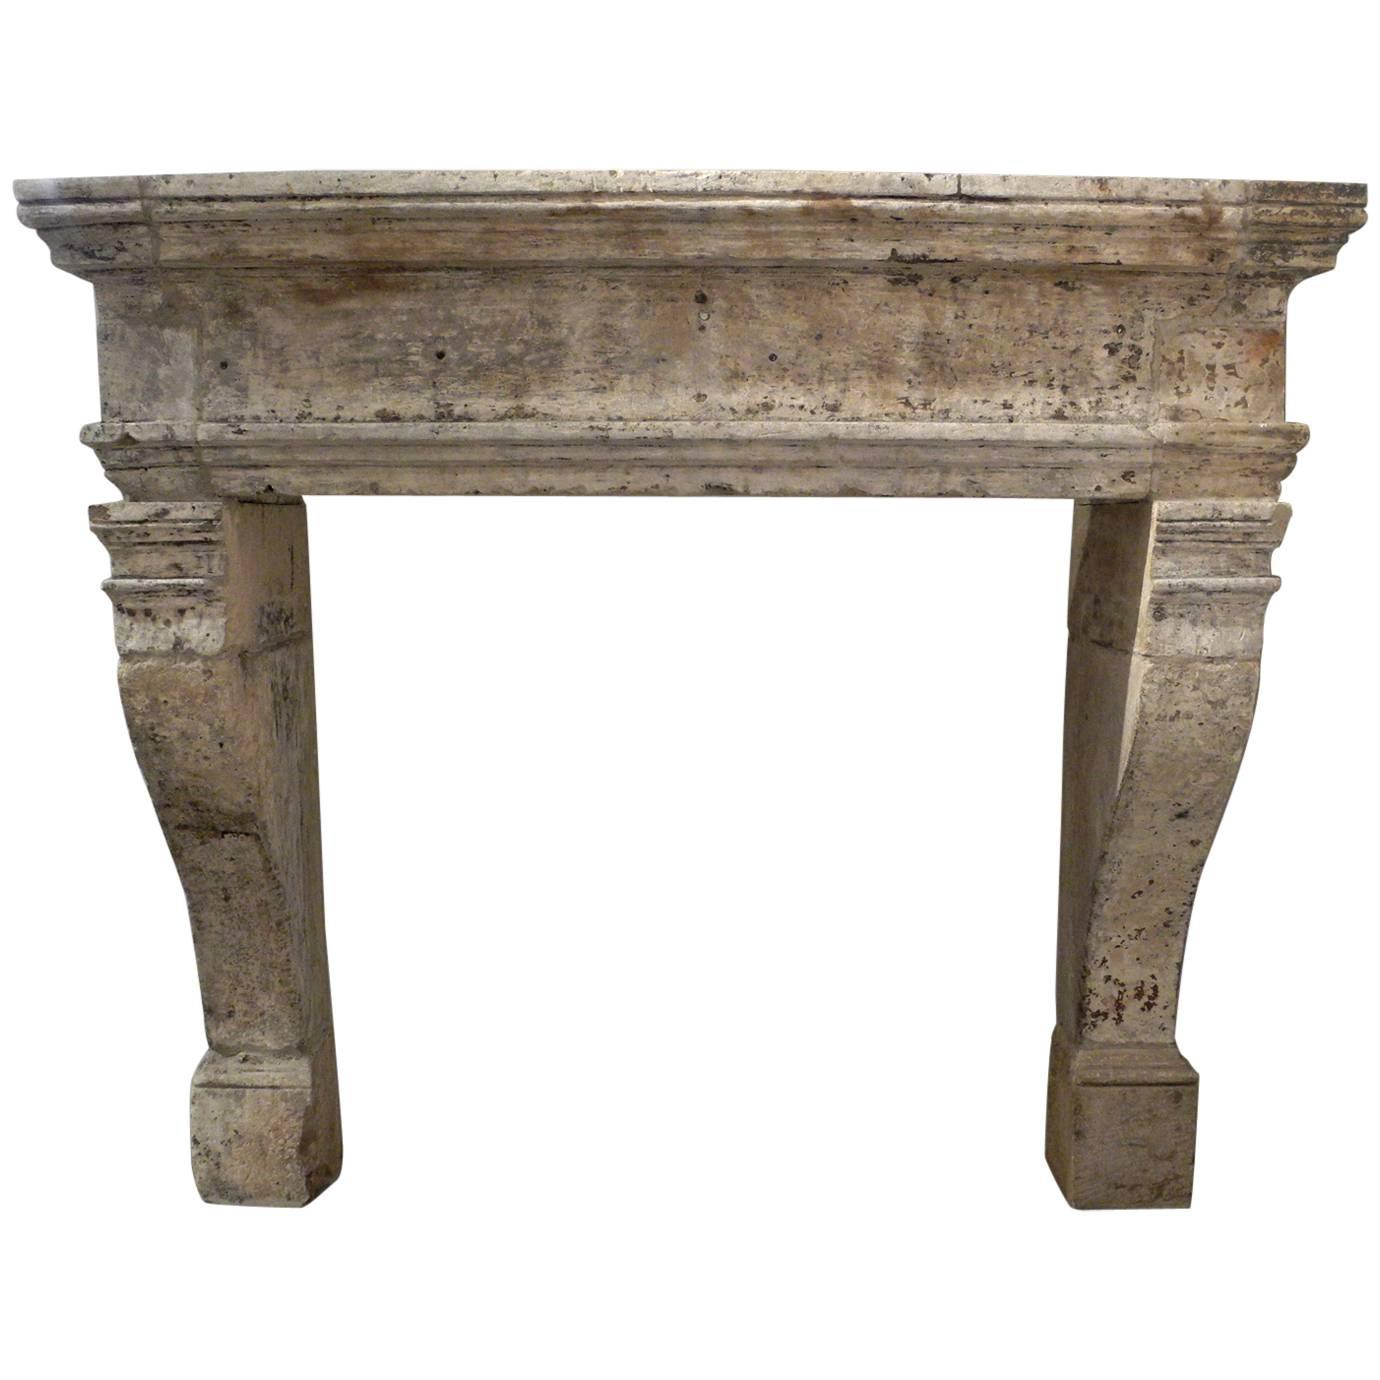 Large Antique 17th Century Stone Mantel with Carved Legs and Lintel For Sale